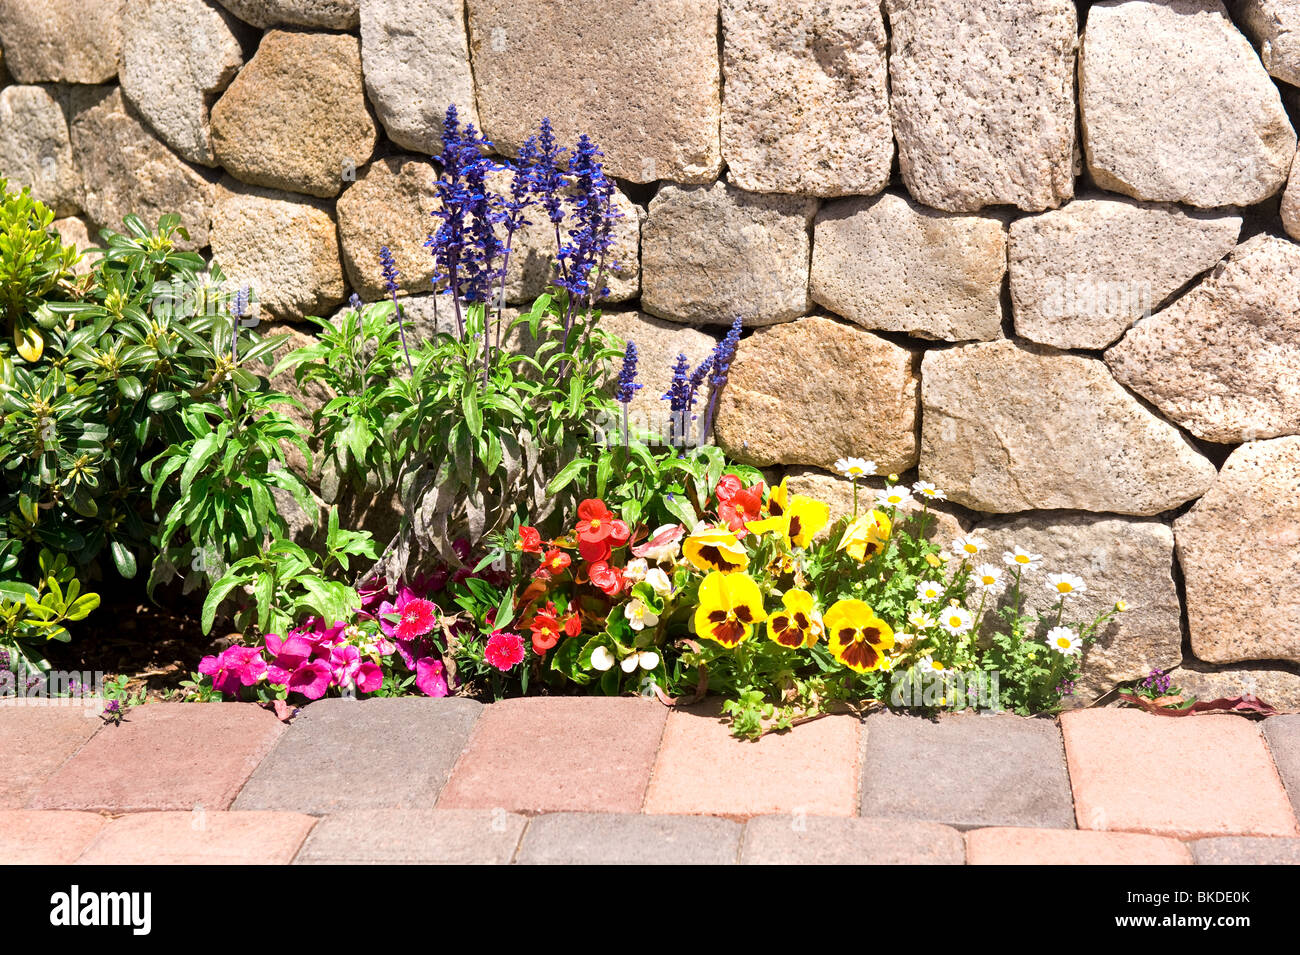 A garden next to a stone wall and paver walkway full of vibrant flowers during springtime. Stock Photo